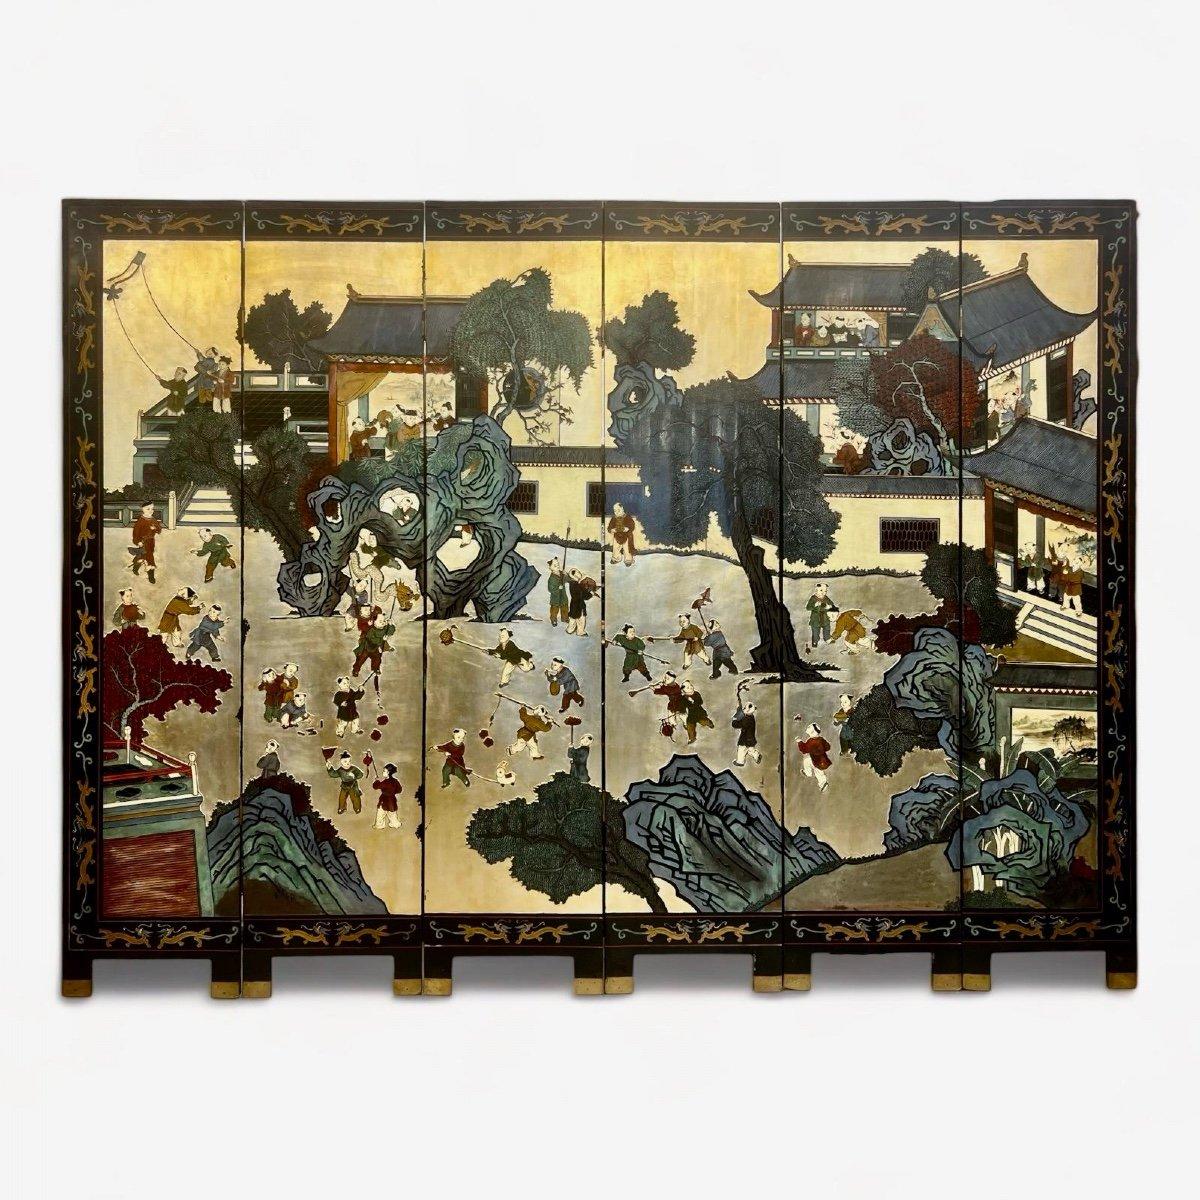 This exquisite six-fold screen in Chinese coromandel lacquer from the early 20th century depicts vivid scenes of children playing in a traditional village landscape. The richness and abundance of characters against the golden background make it an